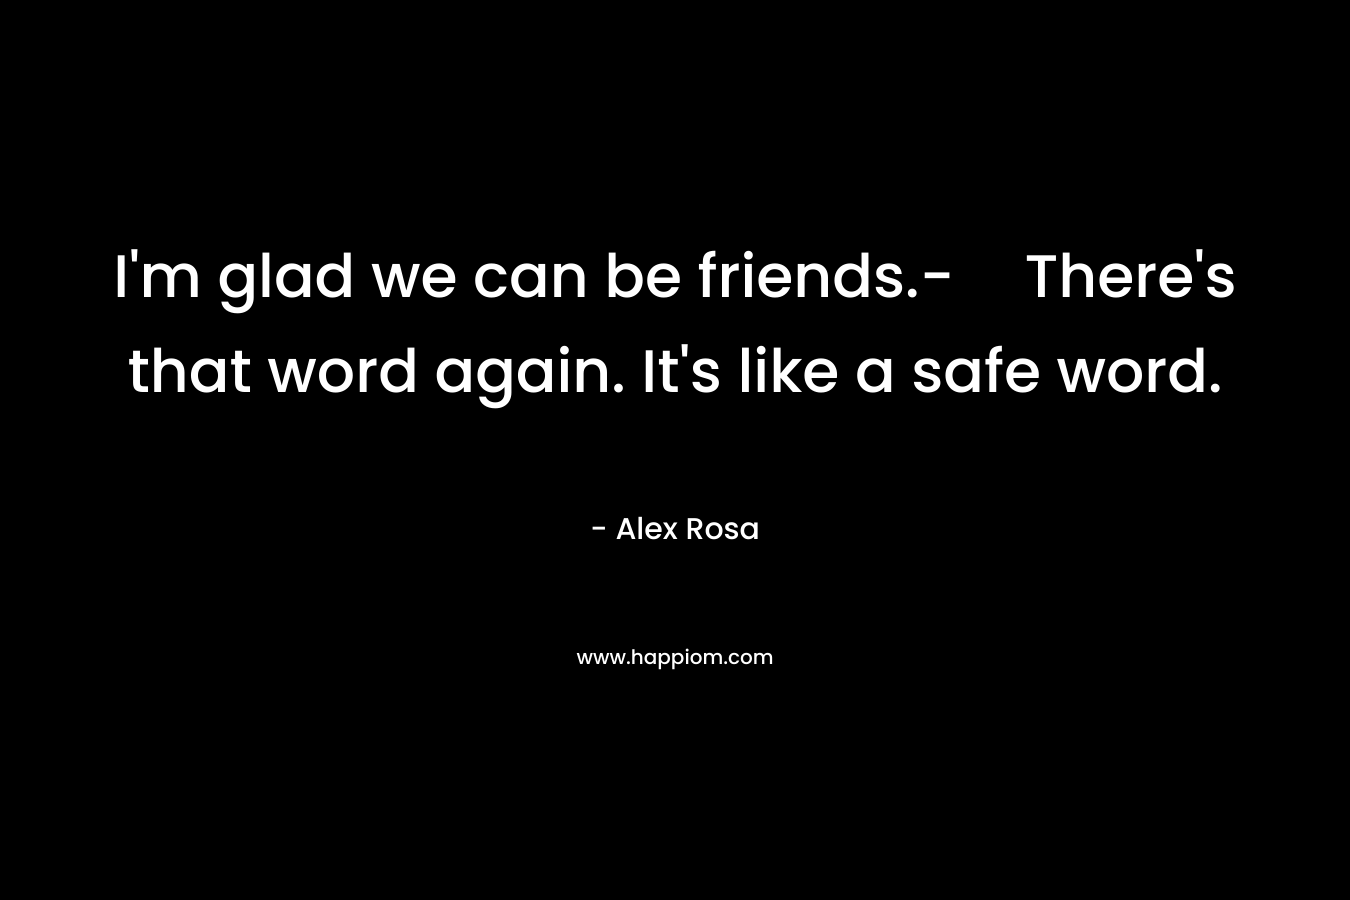 I'm glad we can be friends.-There's that word again. It's like a safe word.